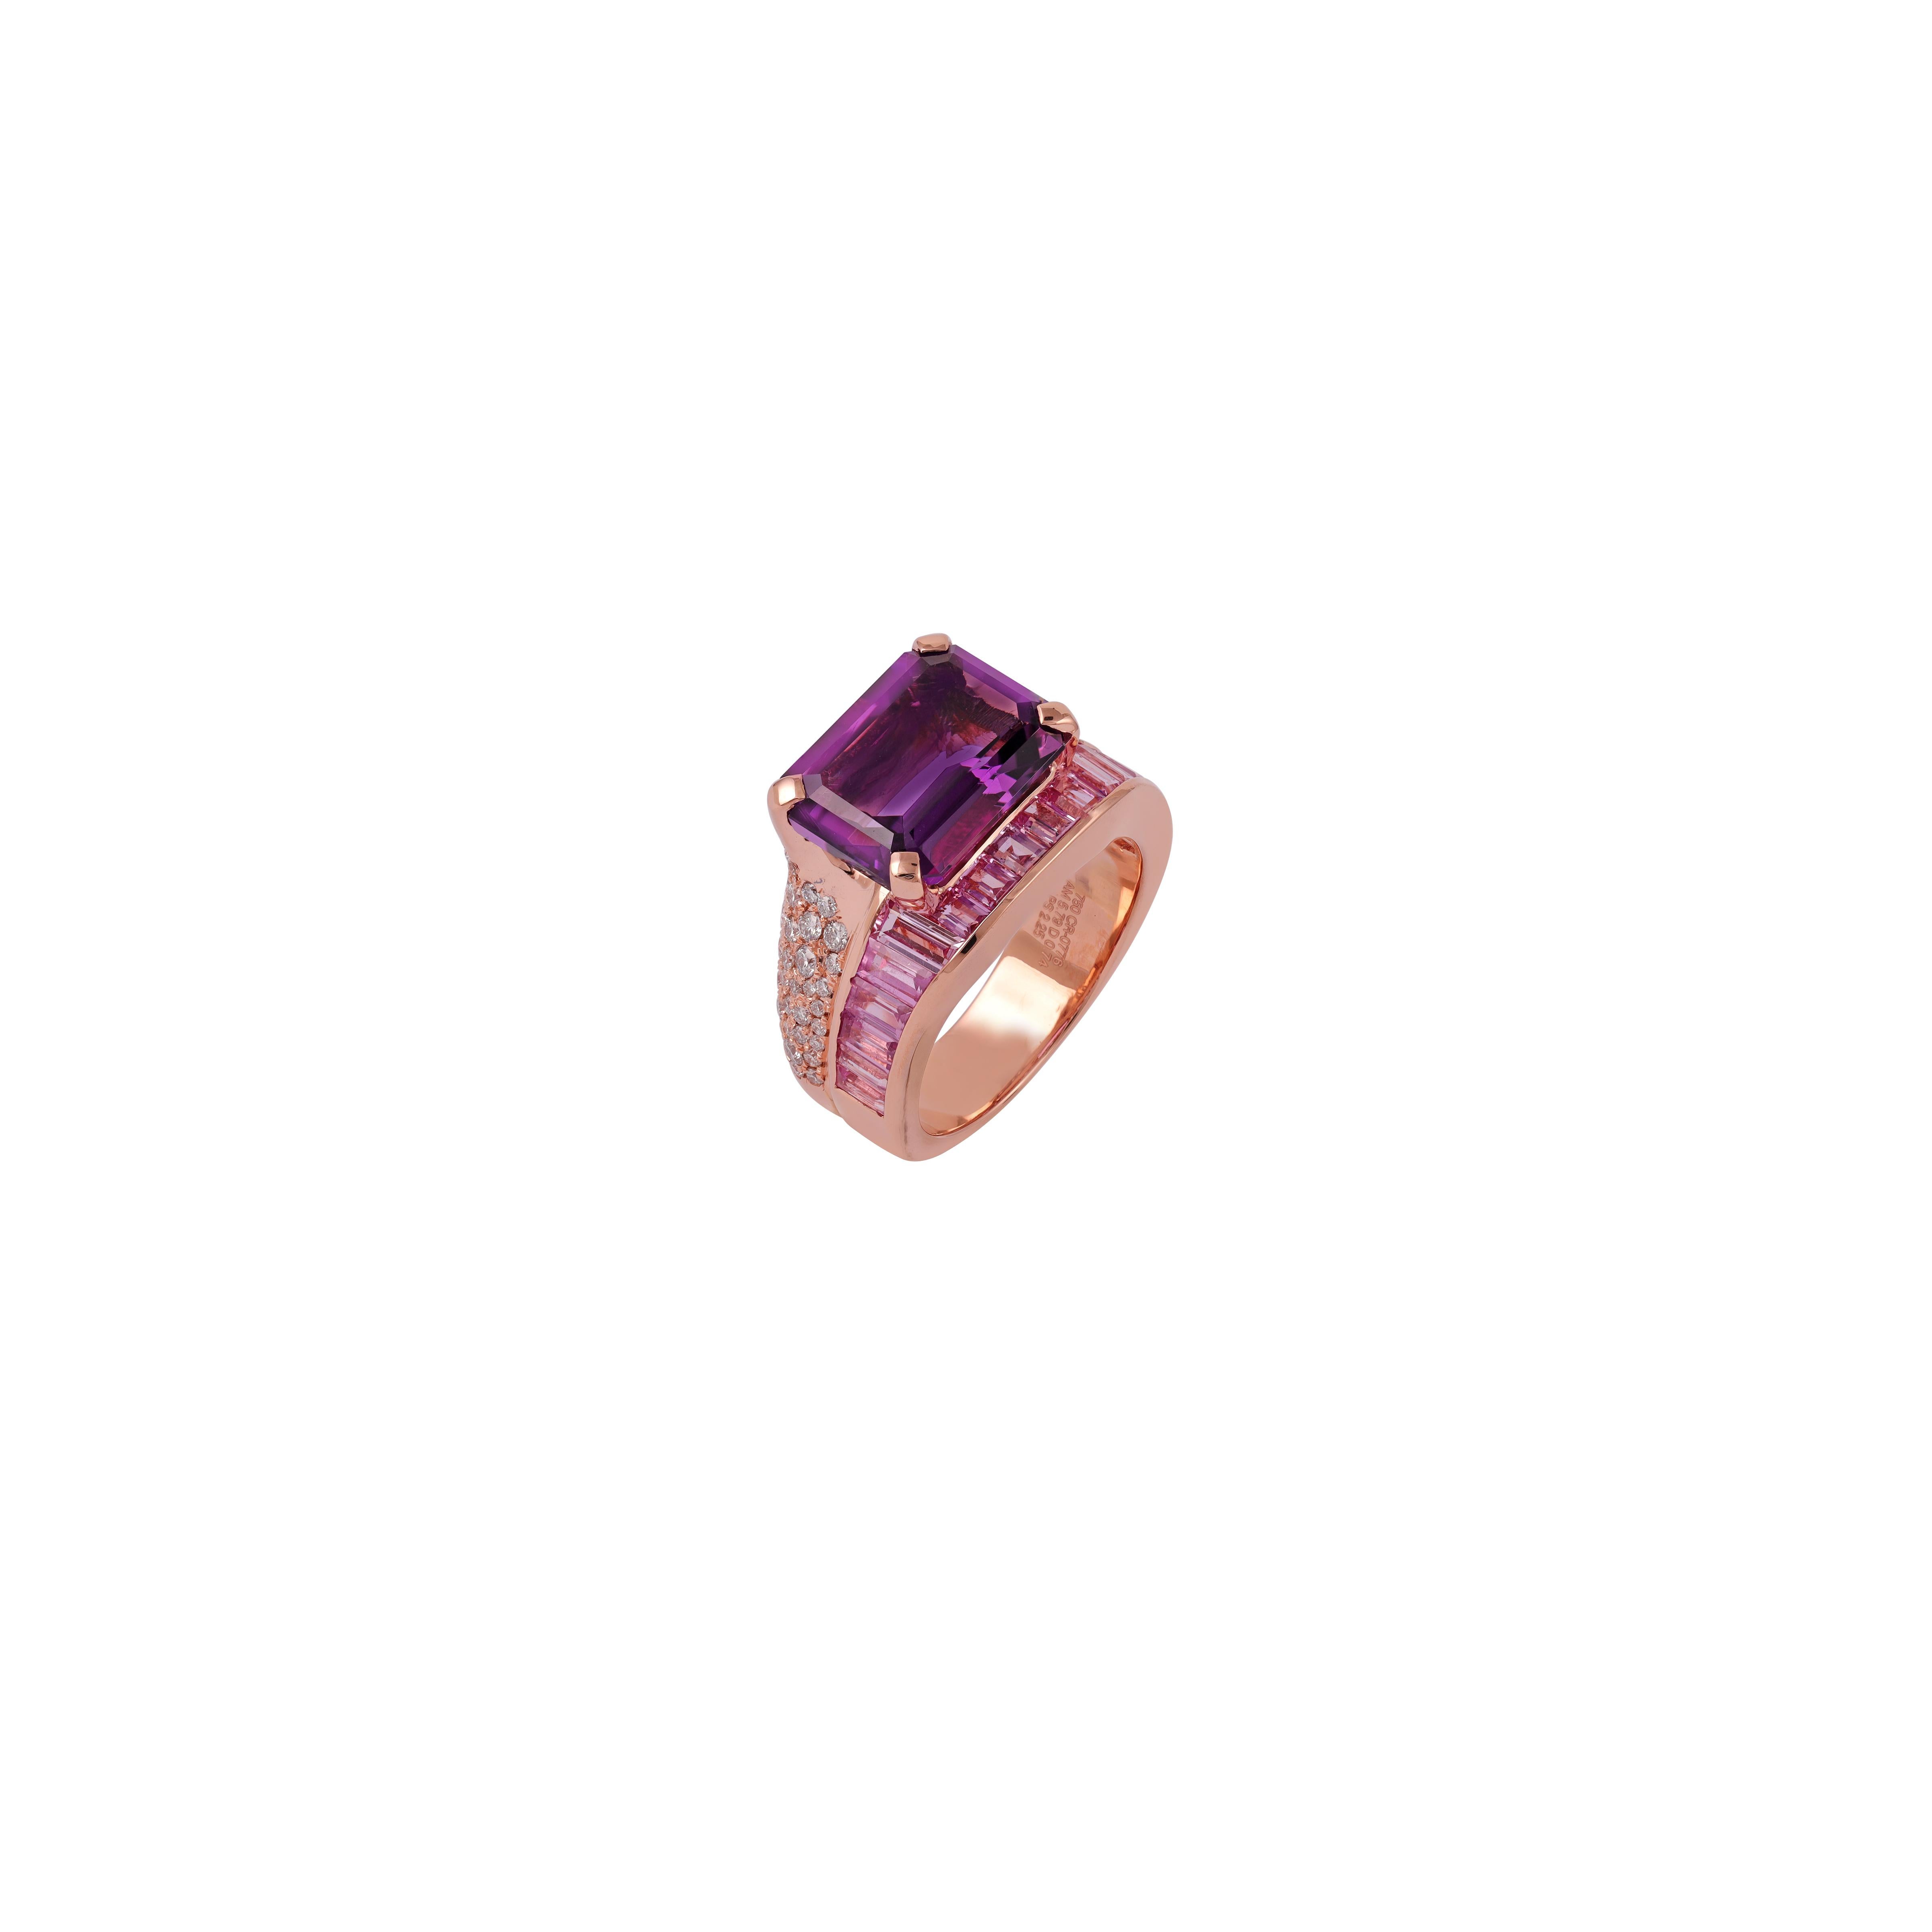 Clear 6.03 Amethyst , Pink Sapphire & Diamond Ring in 18k Gold  In New Condition For Sale In Jaipur, Rajasthan